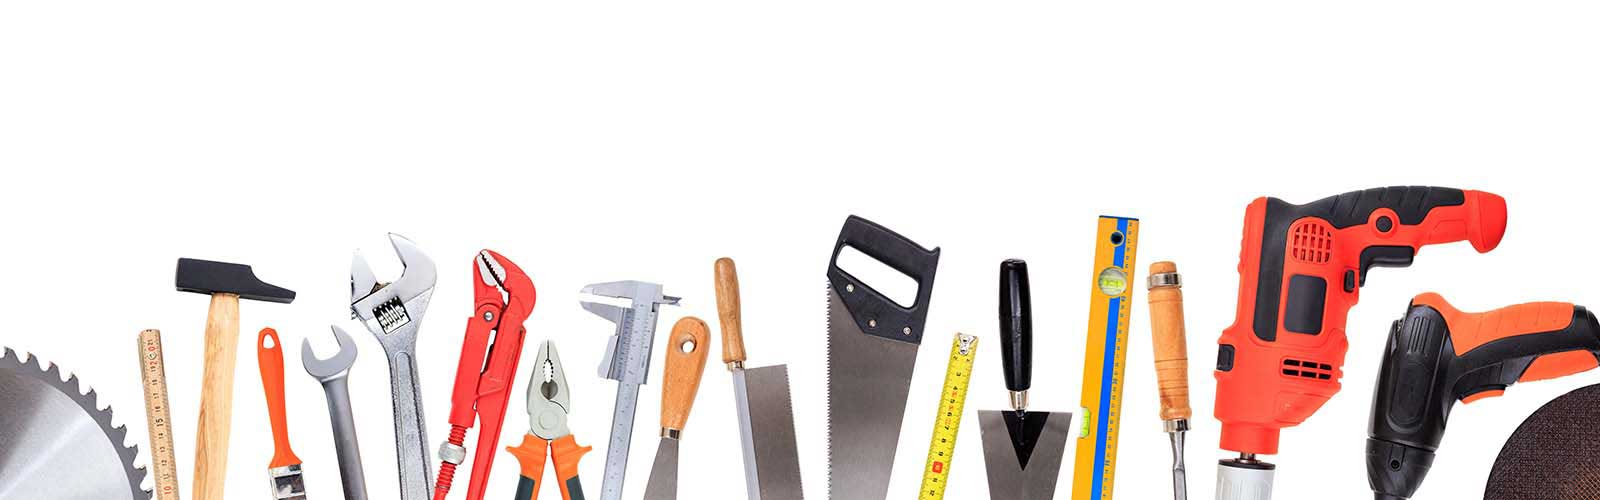 Find Tools and Building Supplies In Our Catalog